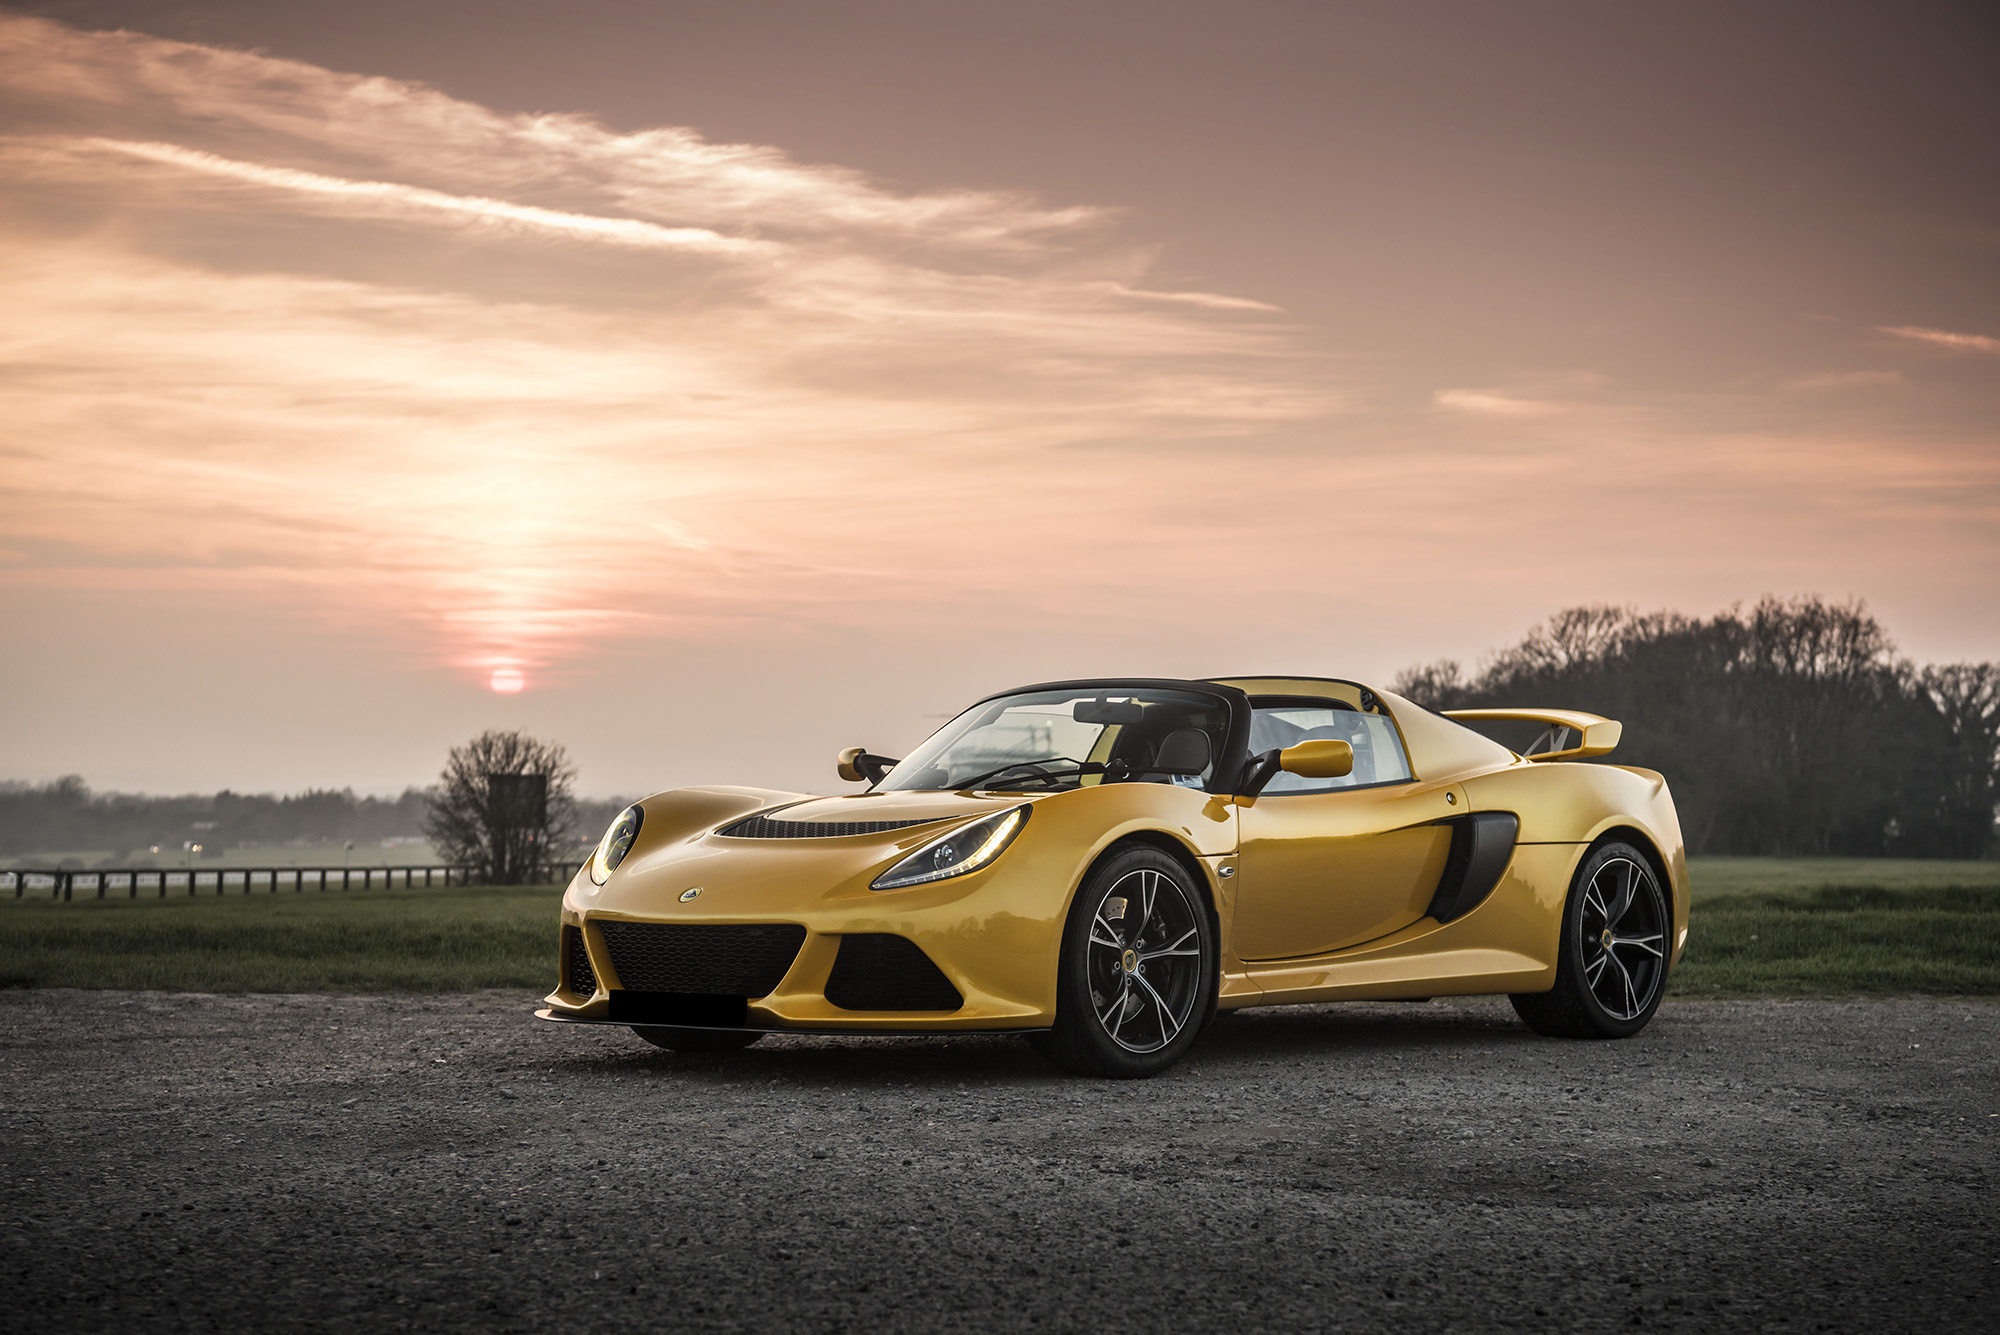 Lotus Exige, Ultimate sports car guide, Track-ready performance, Jaw-dropping looks, 2000x1340 HD Desktop